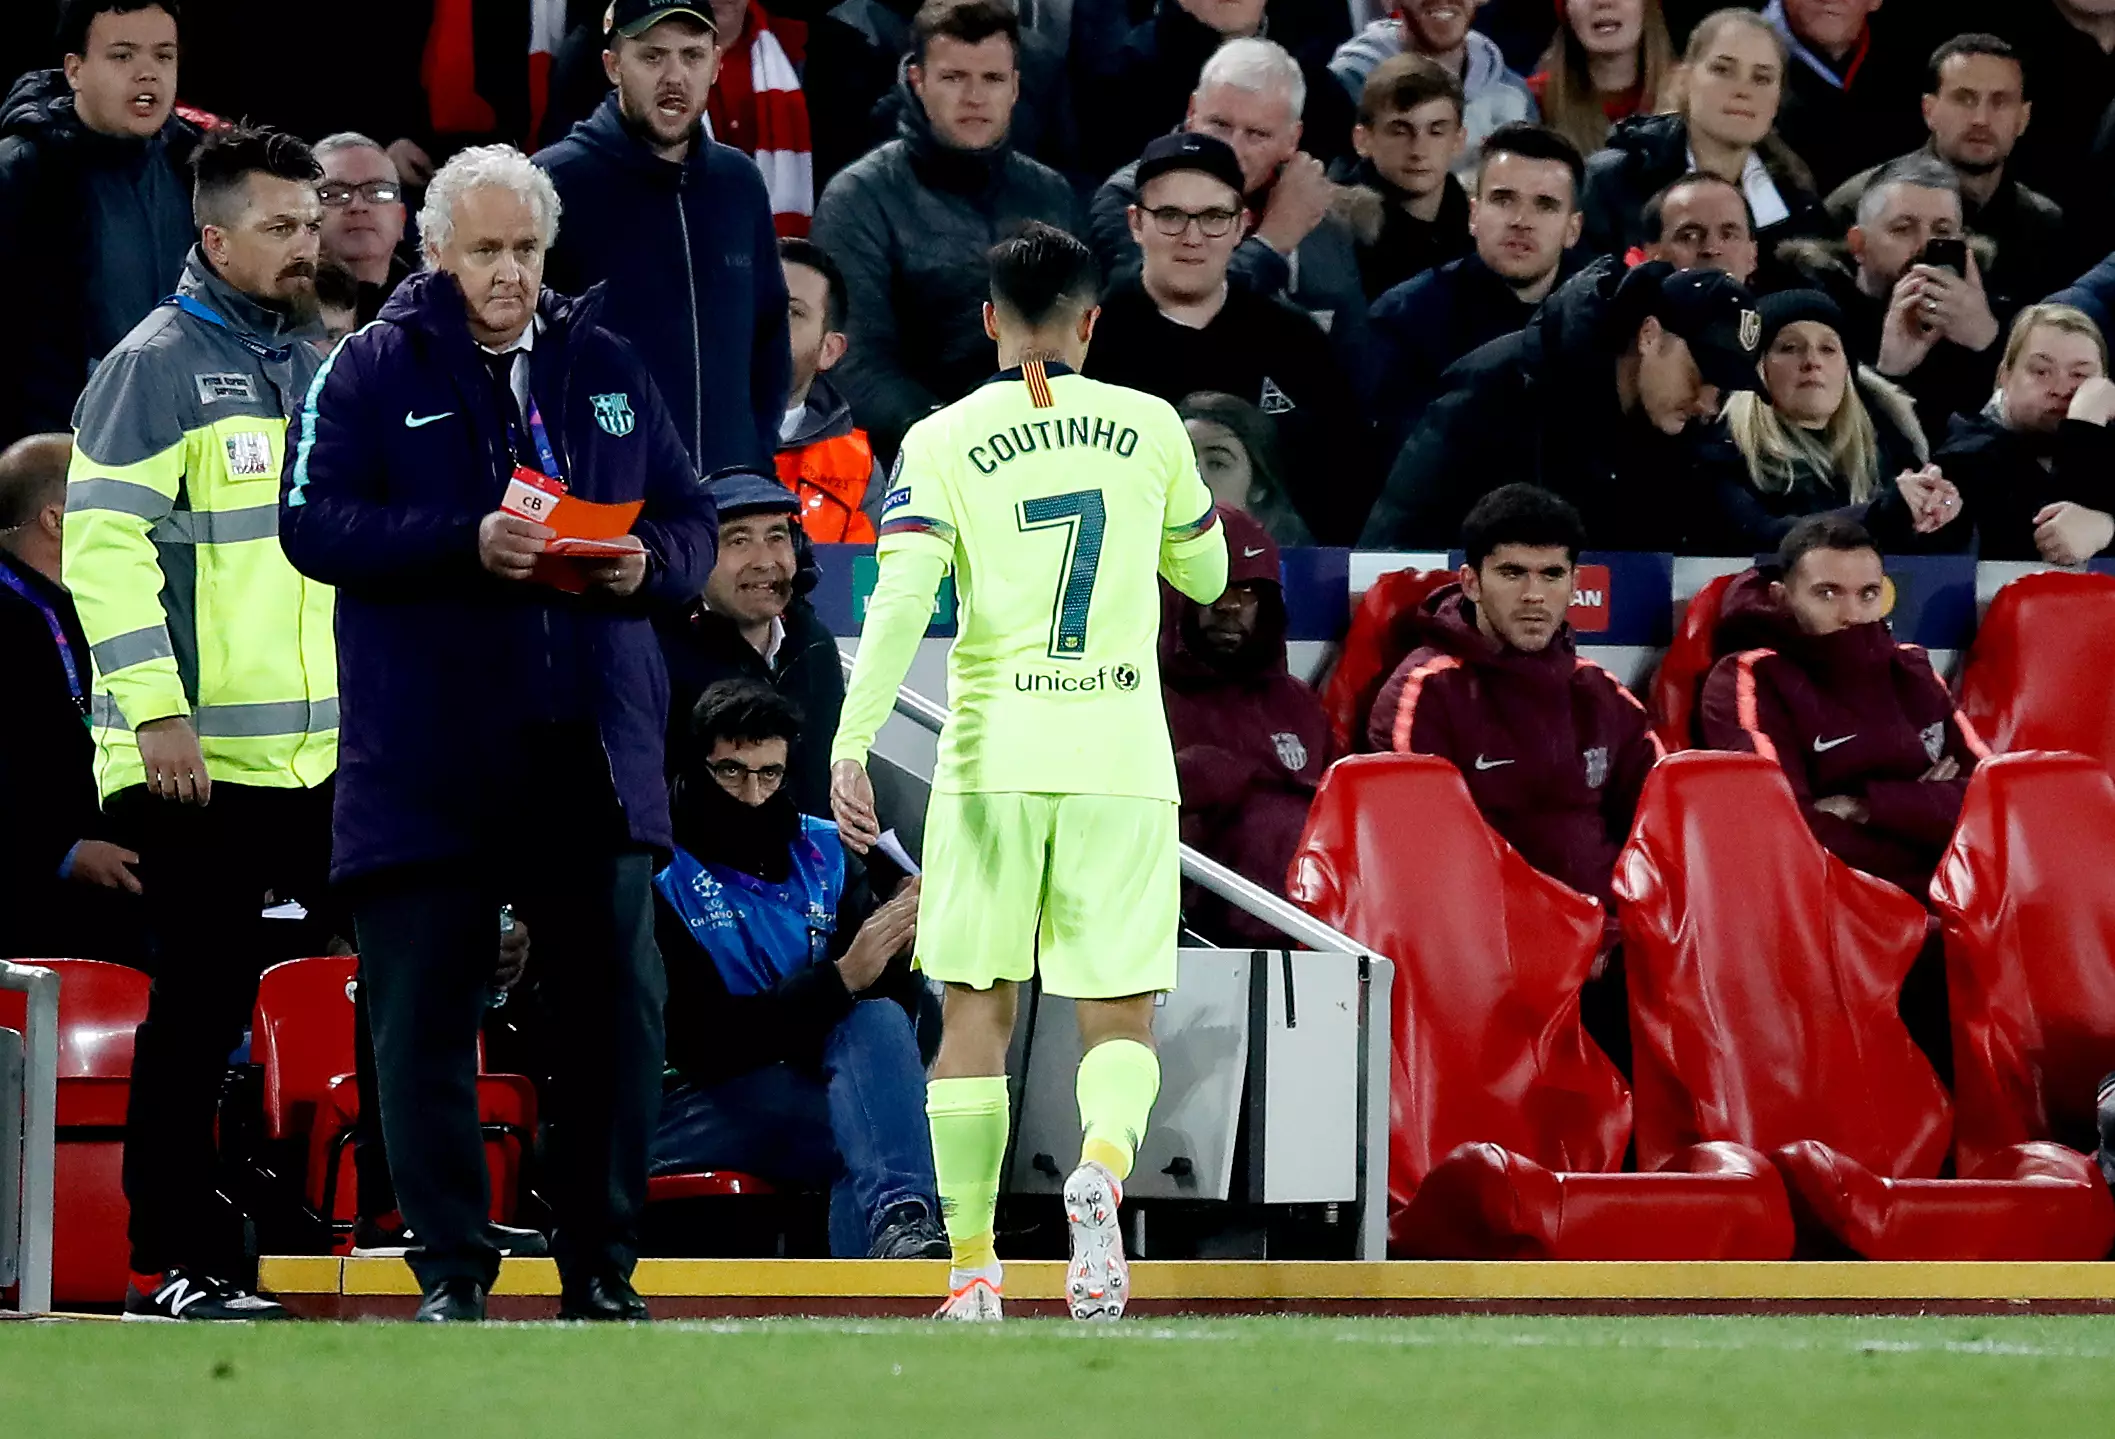 Coutinho walks off at Anfield after being subbed. Image: PA Images